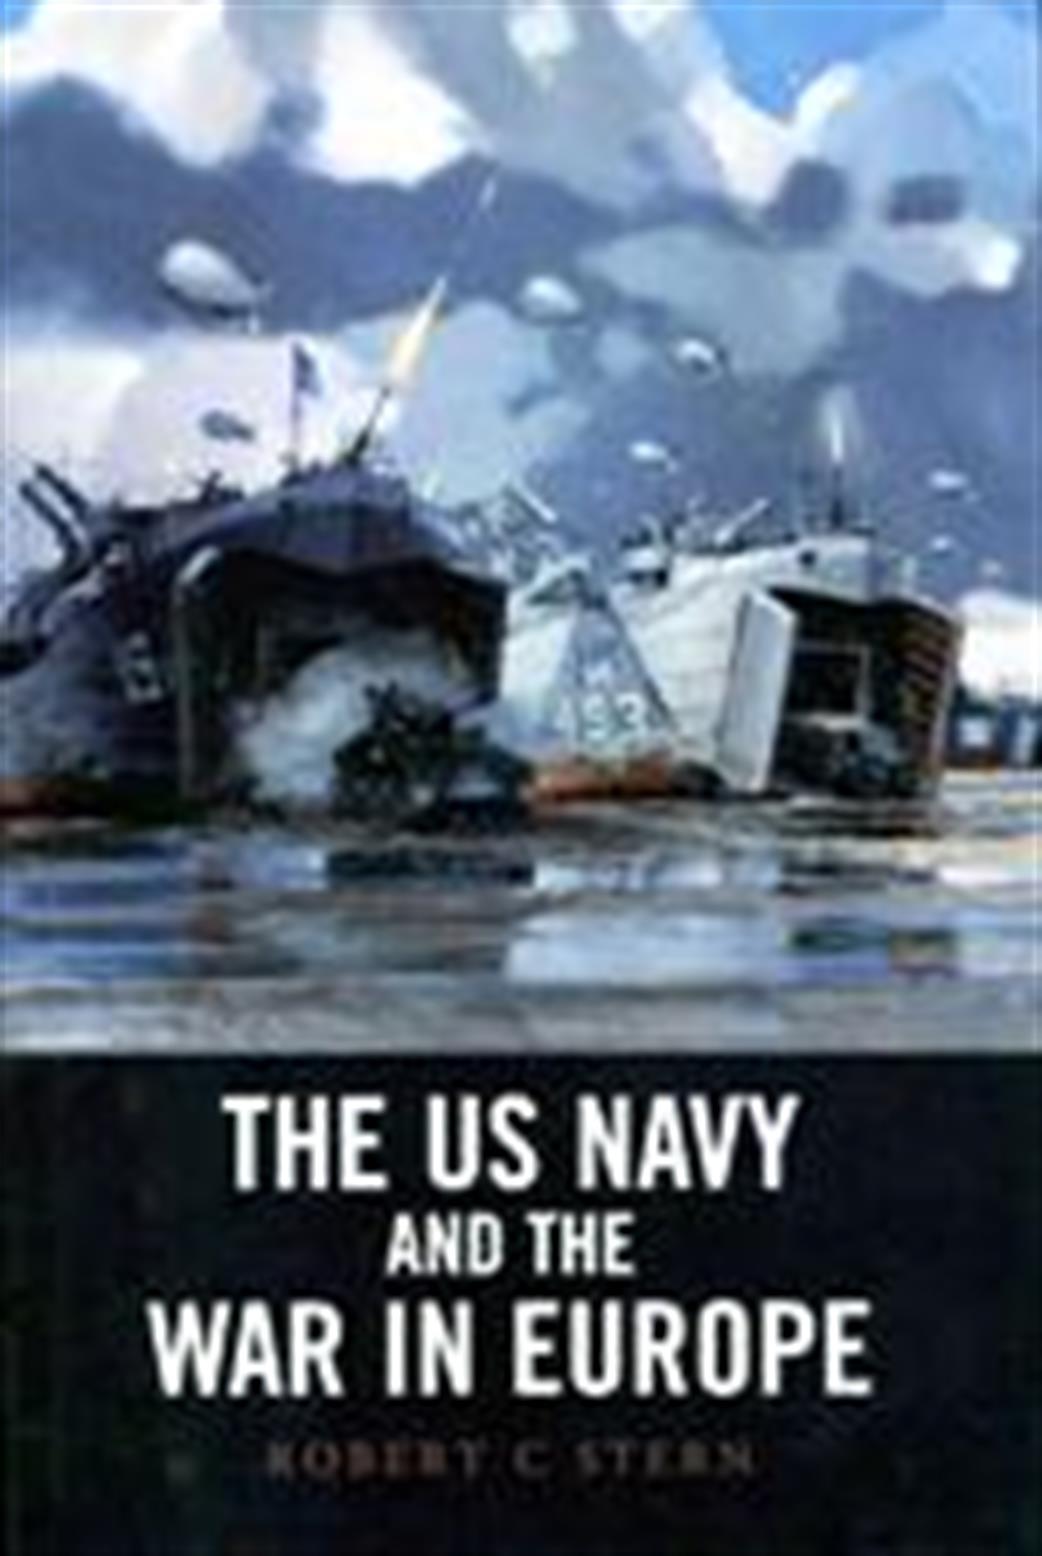 Ian Allan Publishing  9781848320826 US Navy And The War In Europe by Robert C Stern